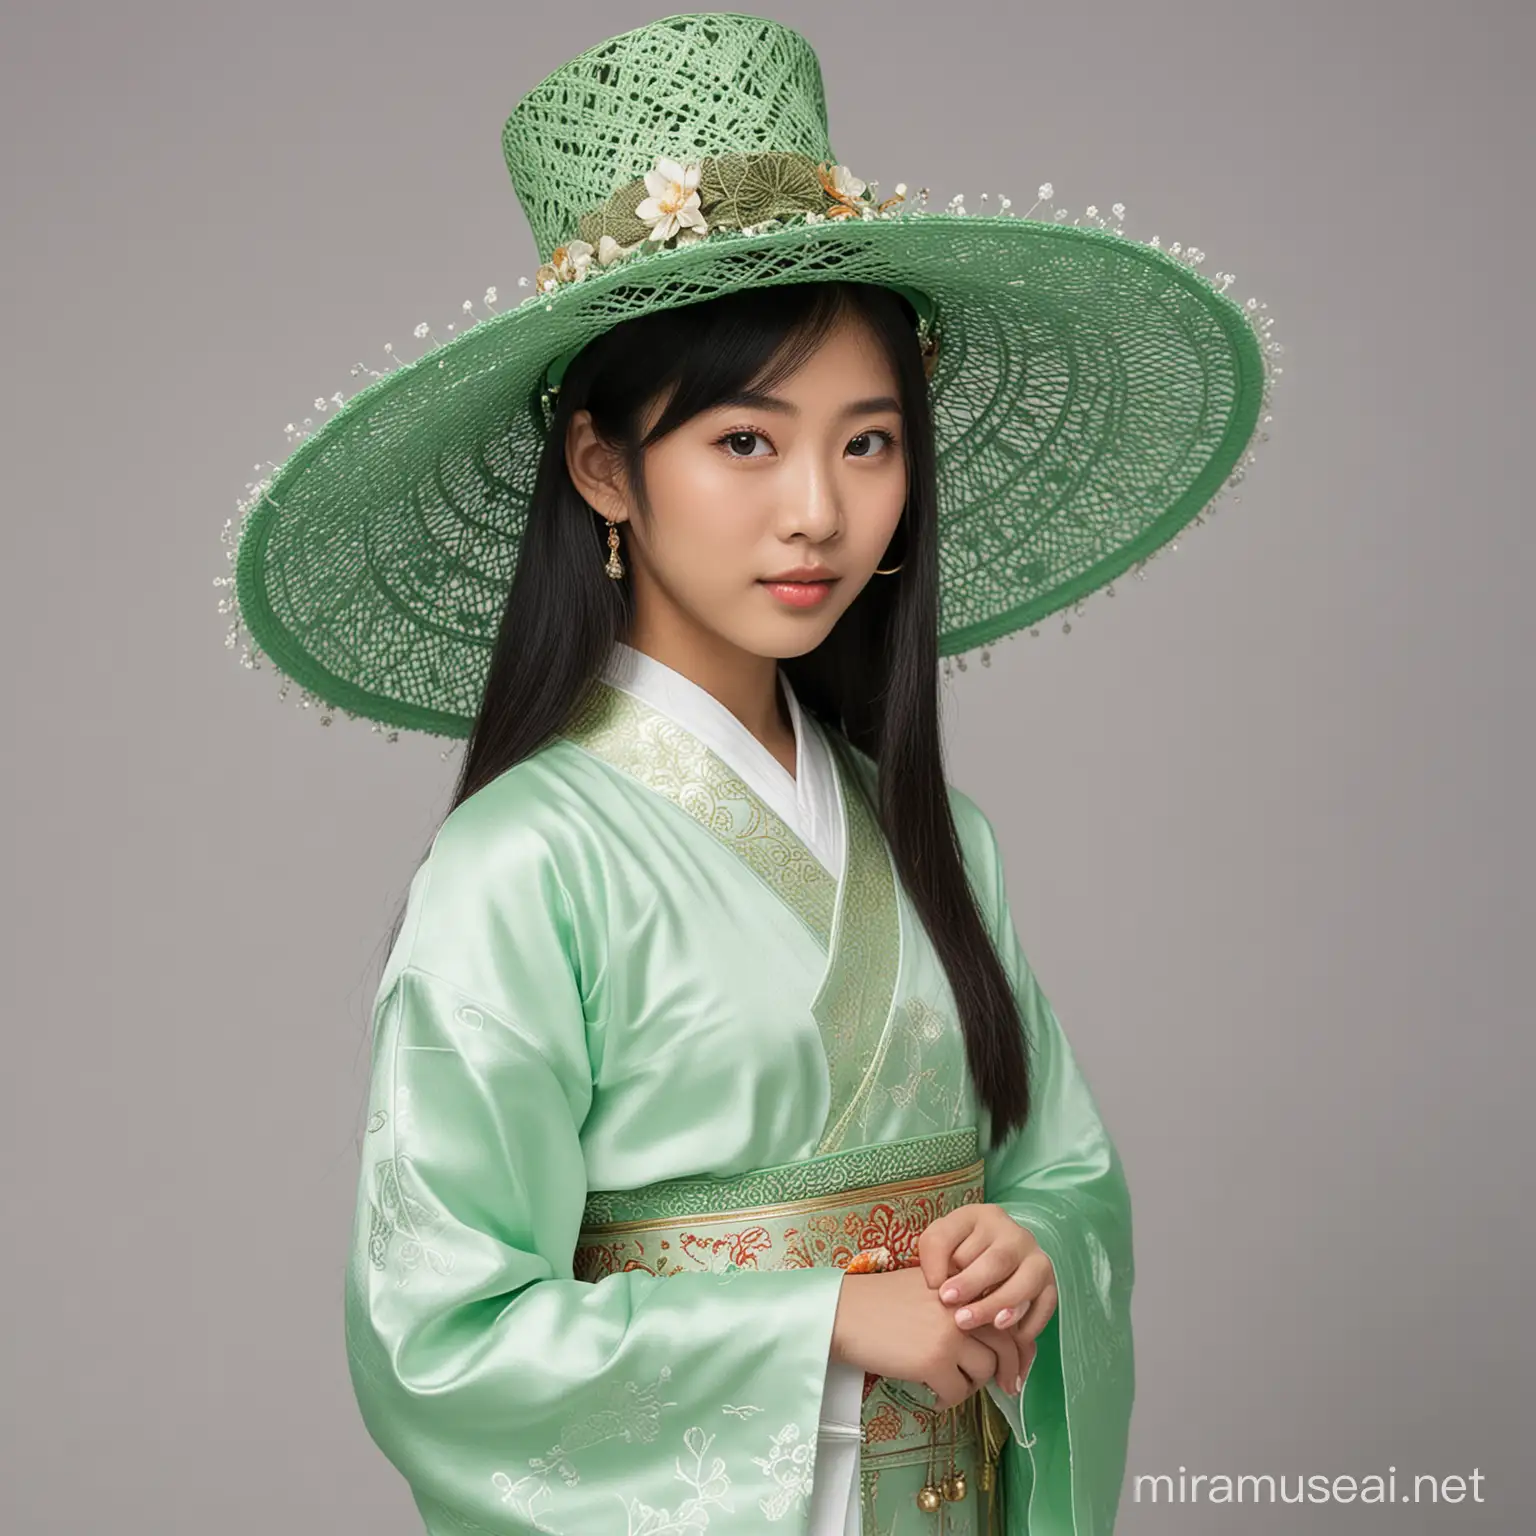 Asian Girl in Traditional Wear with Green High Hat